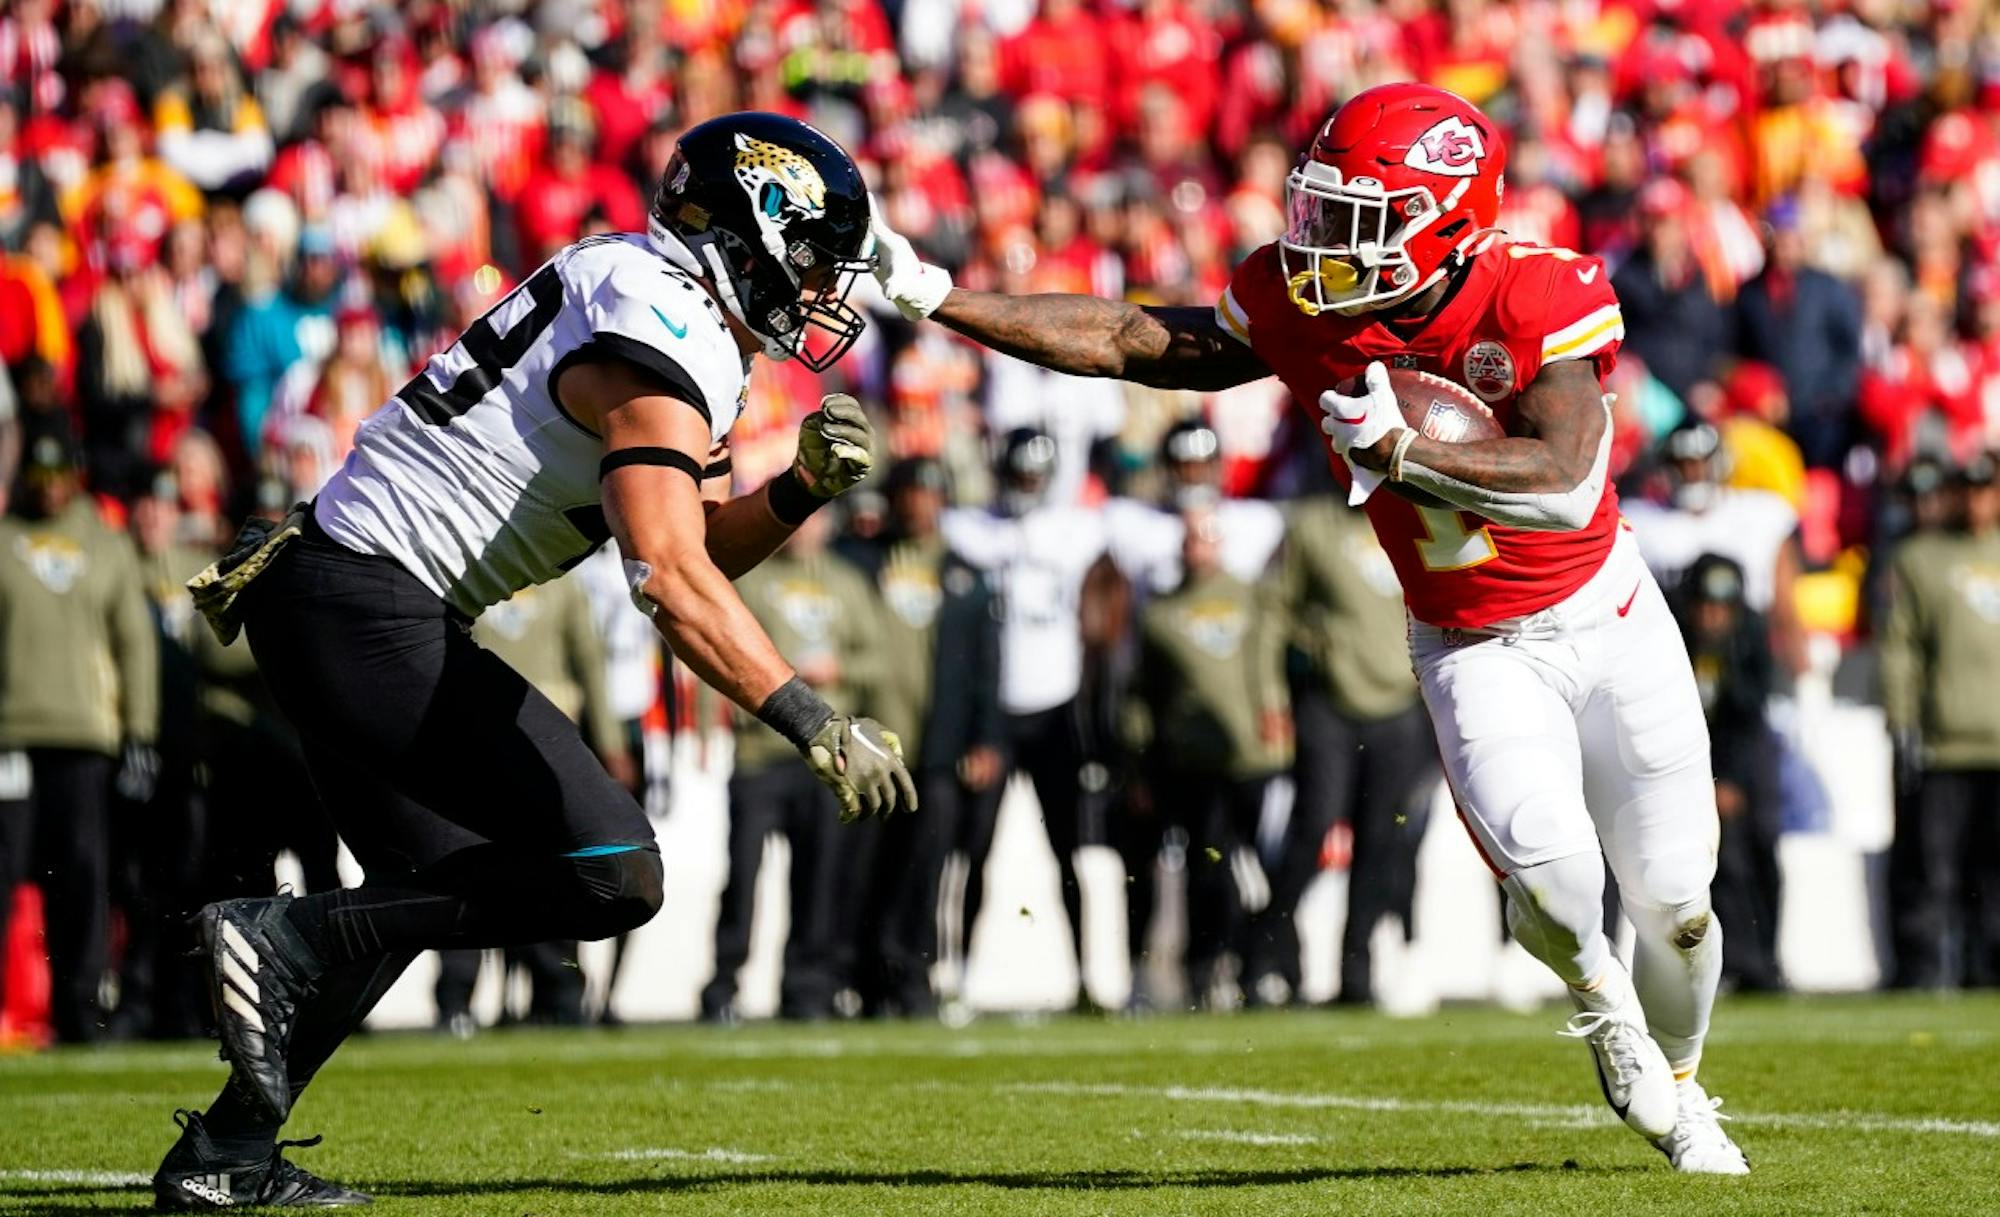 Chiefs vs. Jaguars odds, prediction, betting tips for NFL divisional round  playoff game